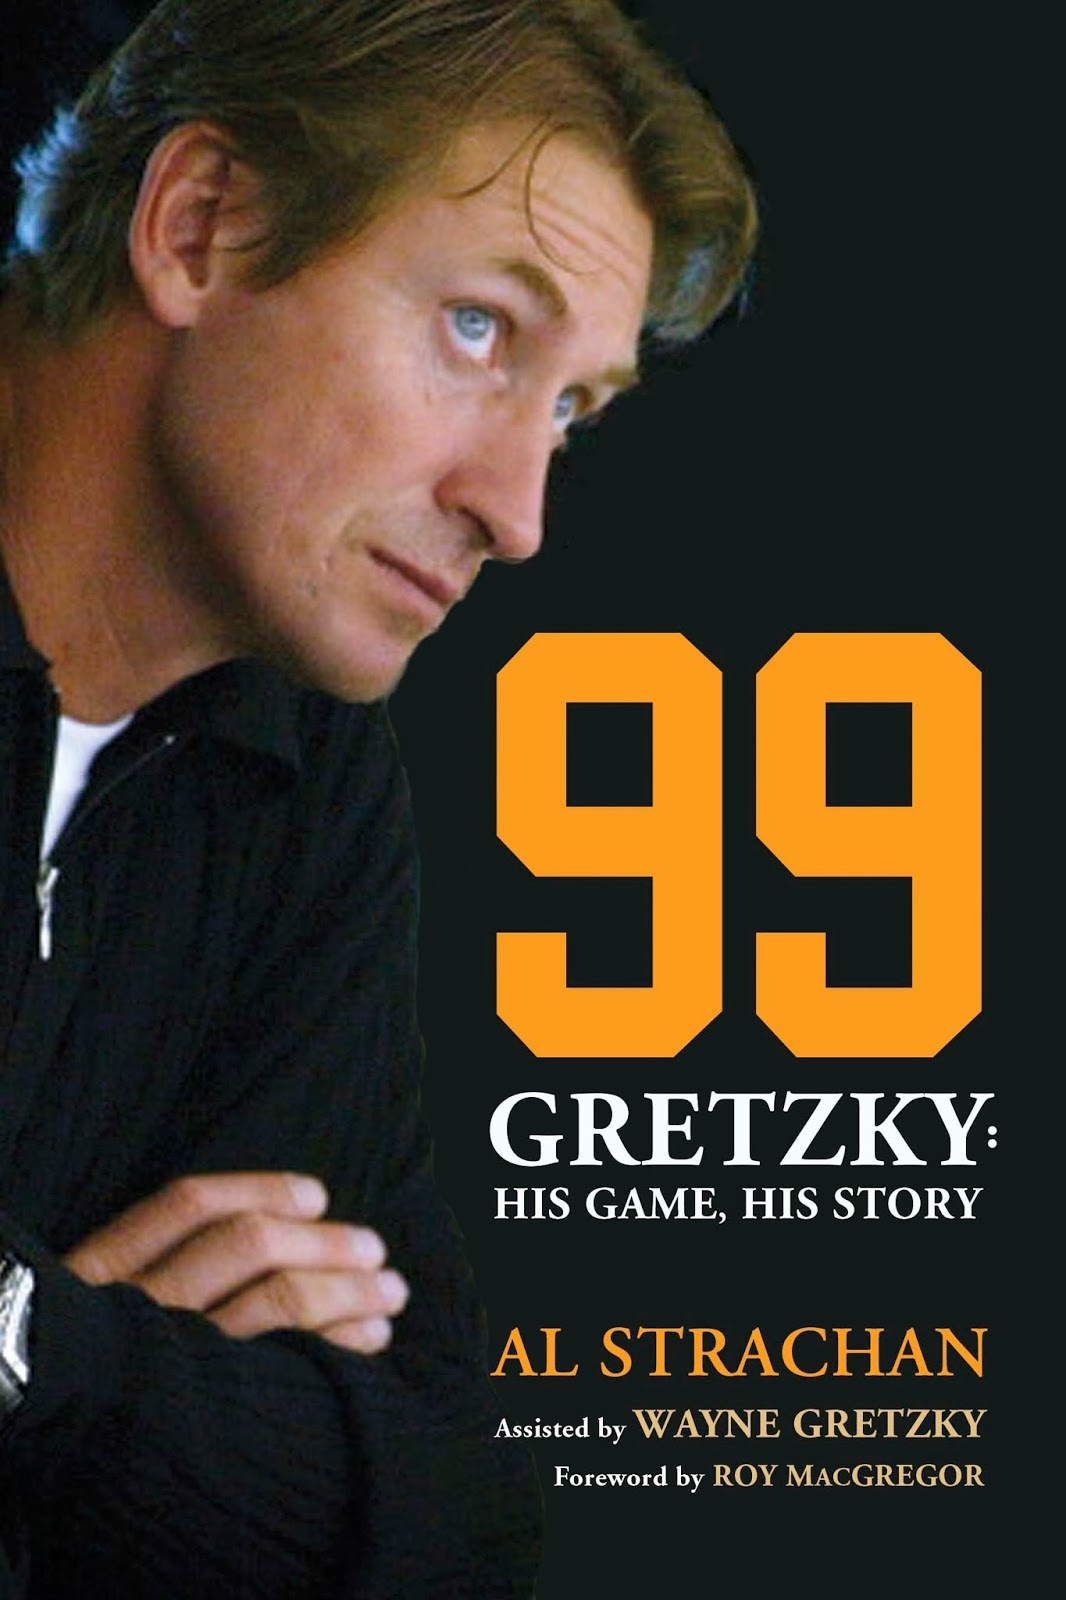 http://discover.halifaxpubliclibraries.ca/?q=title:99%20gretzky%20his%20game%20his%20story